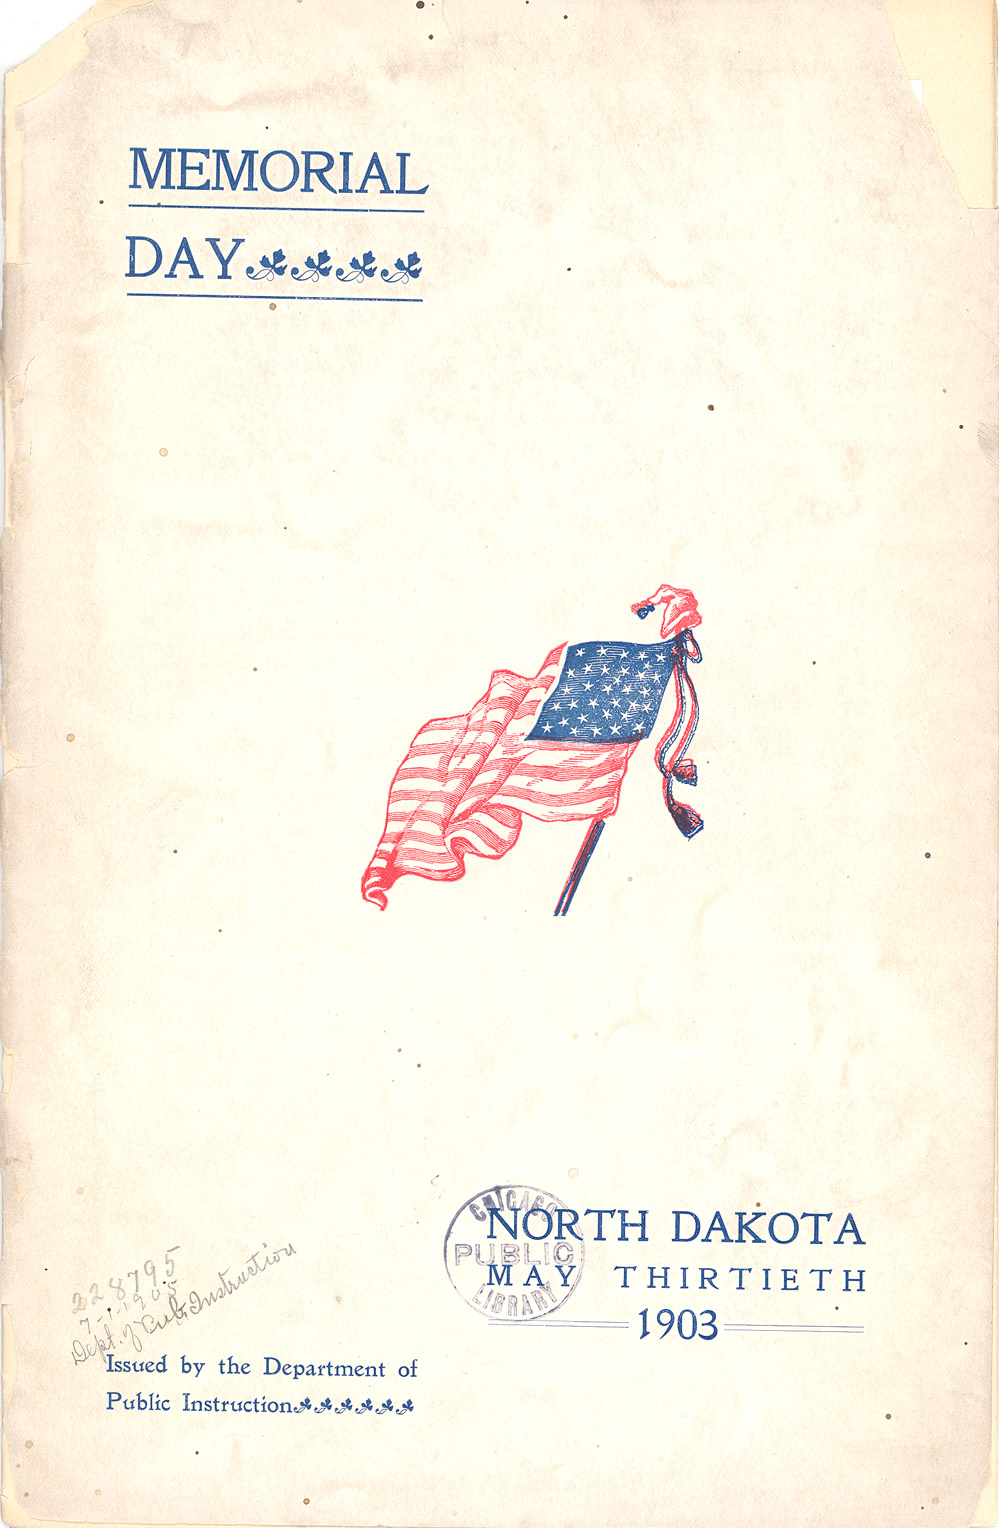 These pages are from the Memorial Day Program booklet of 1903. The North Dakota Superintendent of Public Instruction sent a copy of this booklet to every school. There were also programs for George Washington’s birthday, Abraham Lincoln’s Birthday, and Arbor Day.